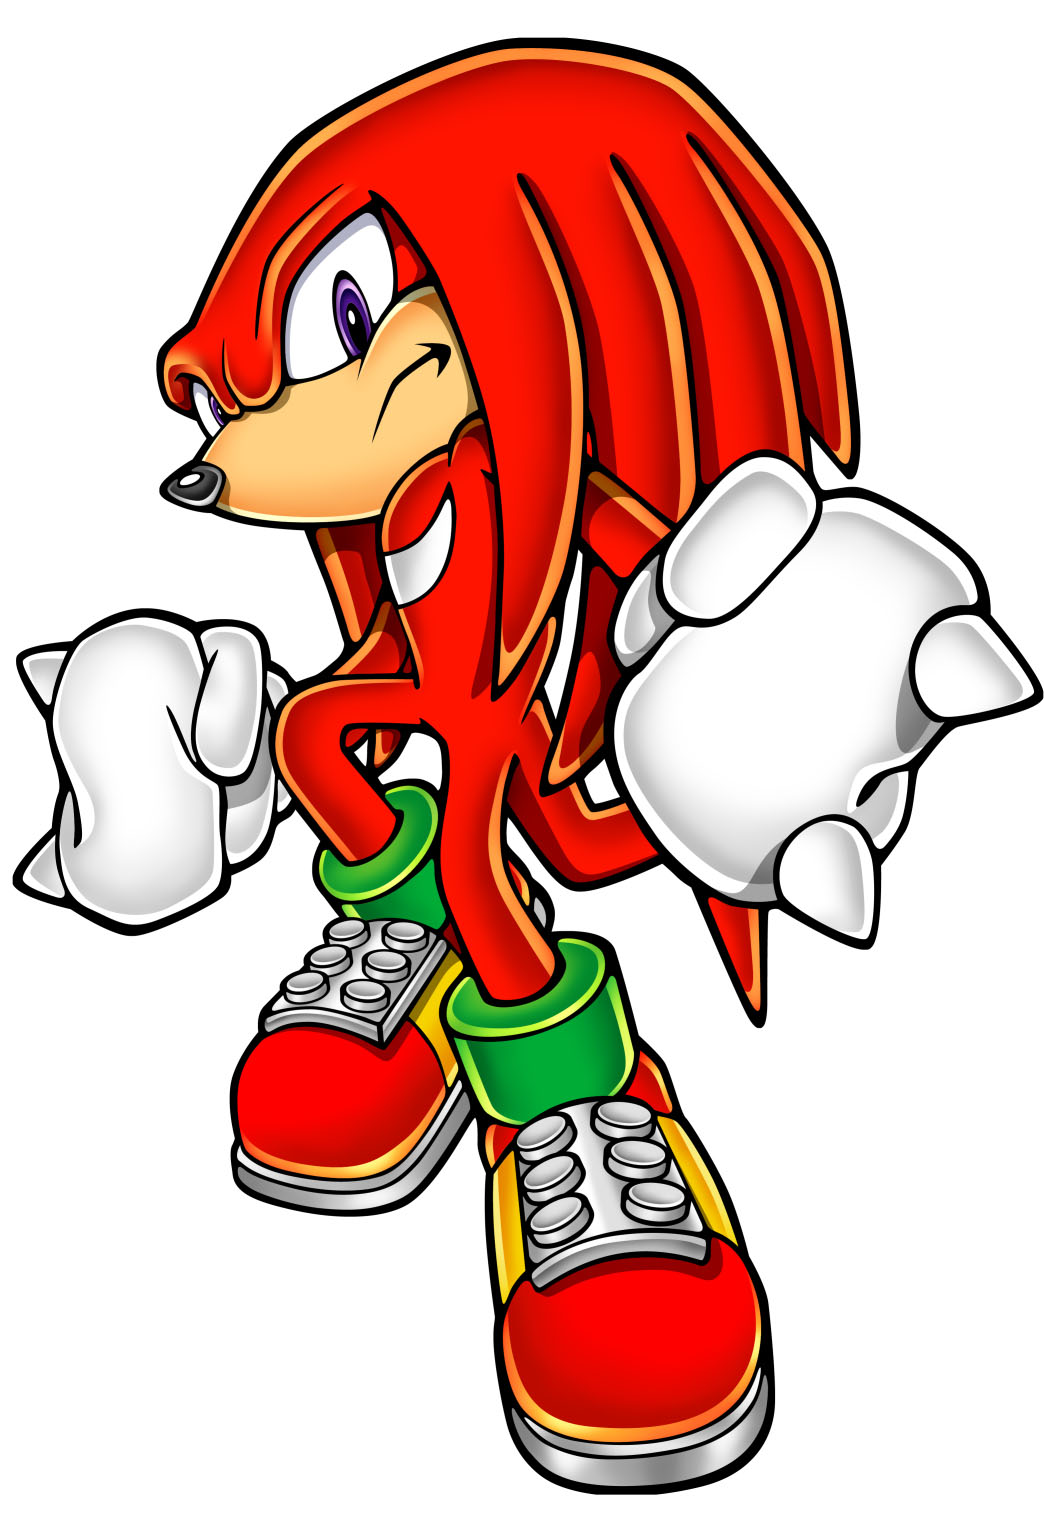 Knuckles the Echidna from the Sonic Series | Game-Art-HQ